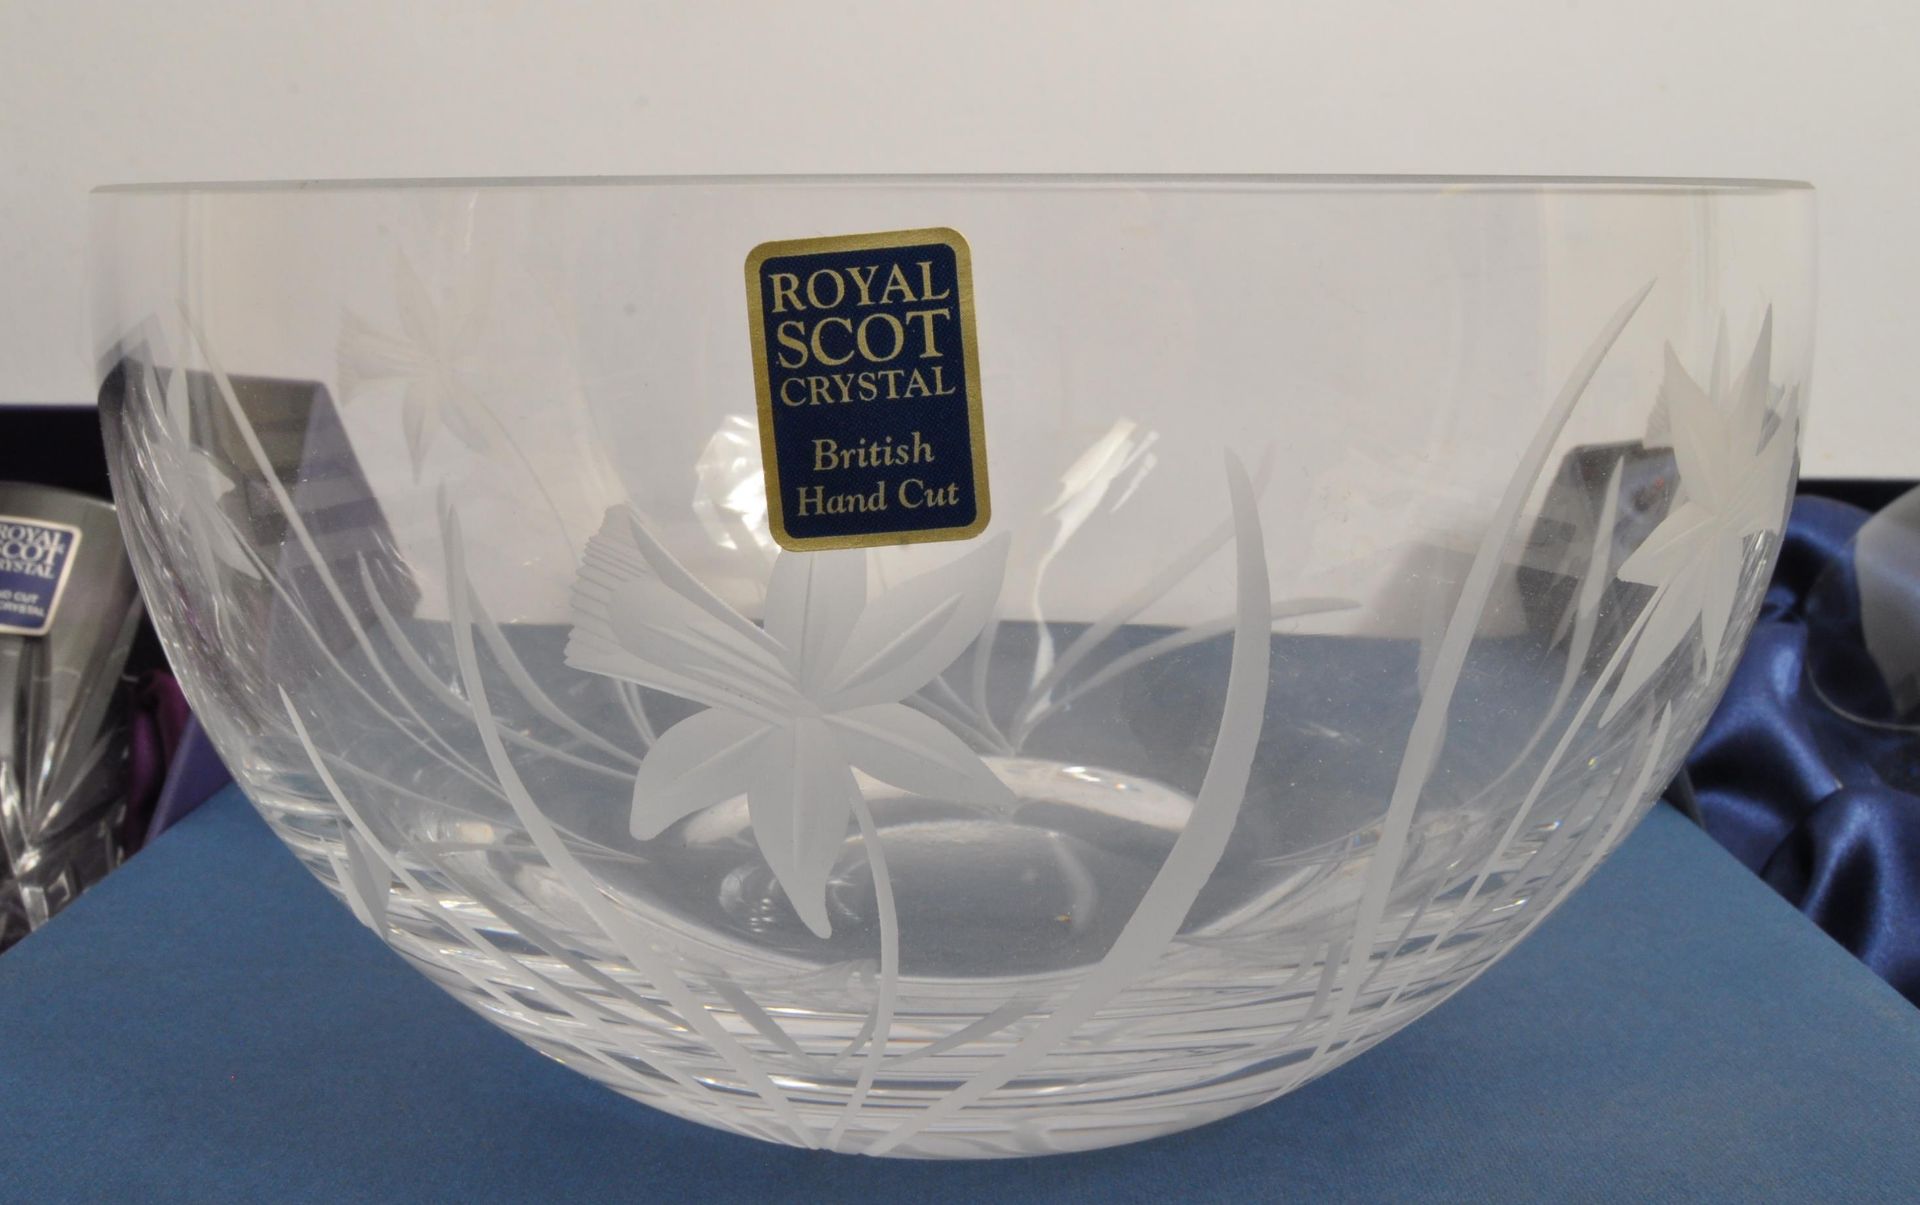 NOS ROYAL SCOT CRYSTAL HAND CUT CRUSTAL DRINKING GLASSES - Image 5 of 5